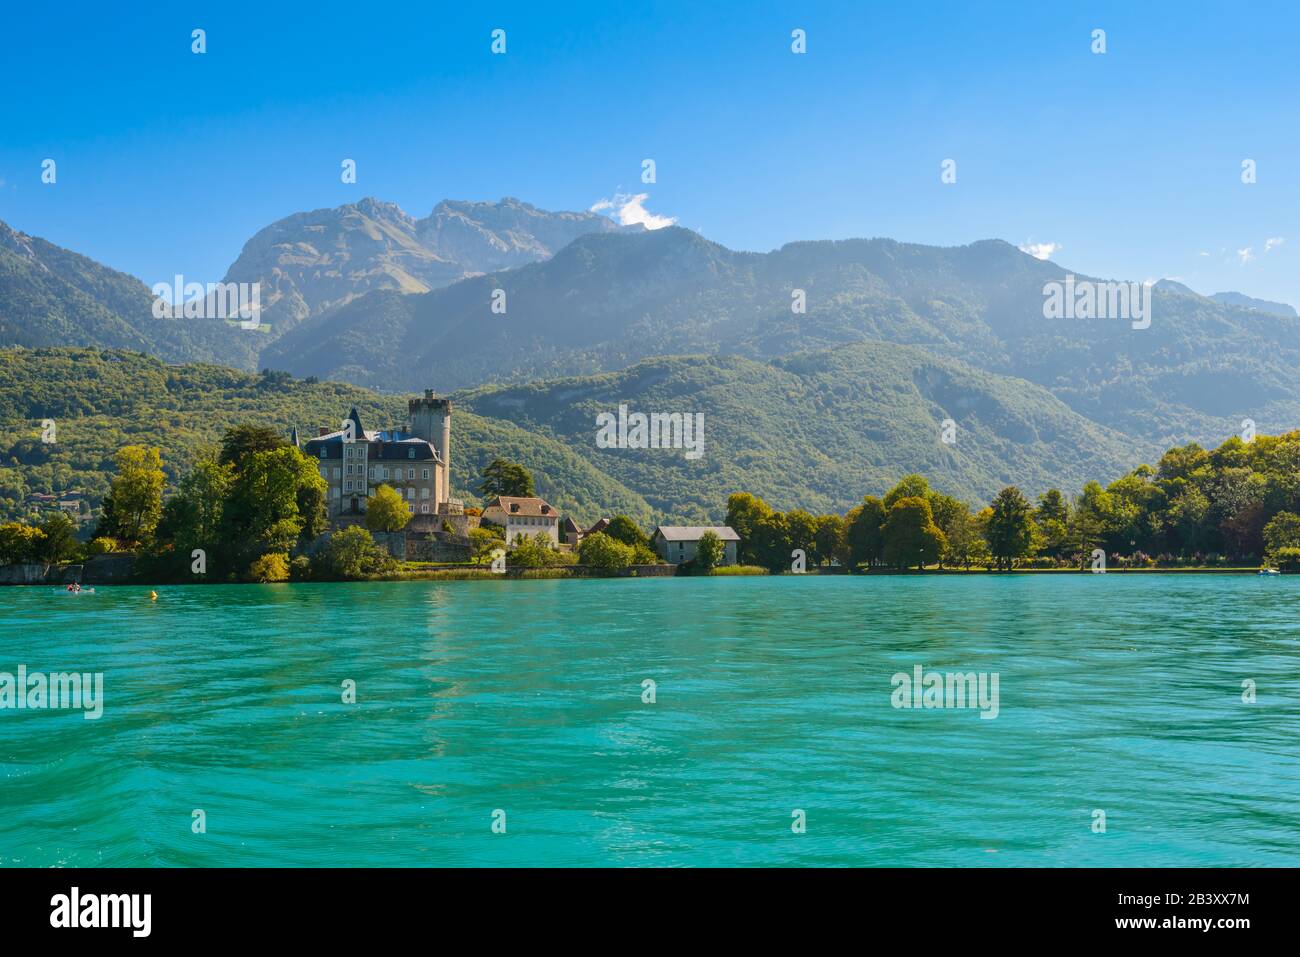 Château de Duingt located on a small island on Lake Annecy connected by a causeway to the mainland in the village of Duingt, France. Stock Photo